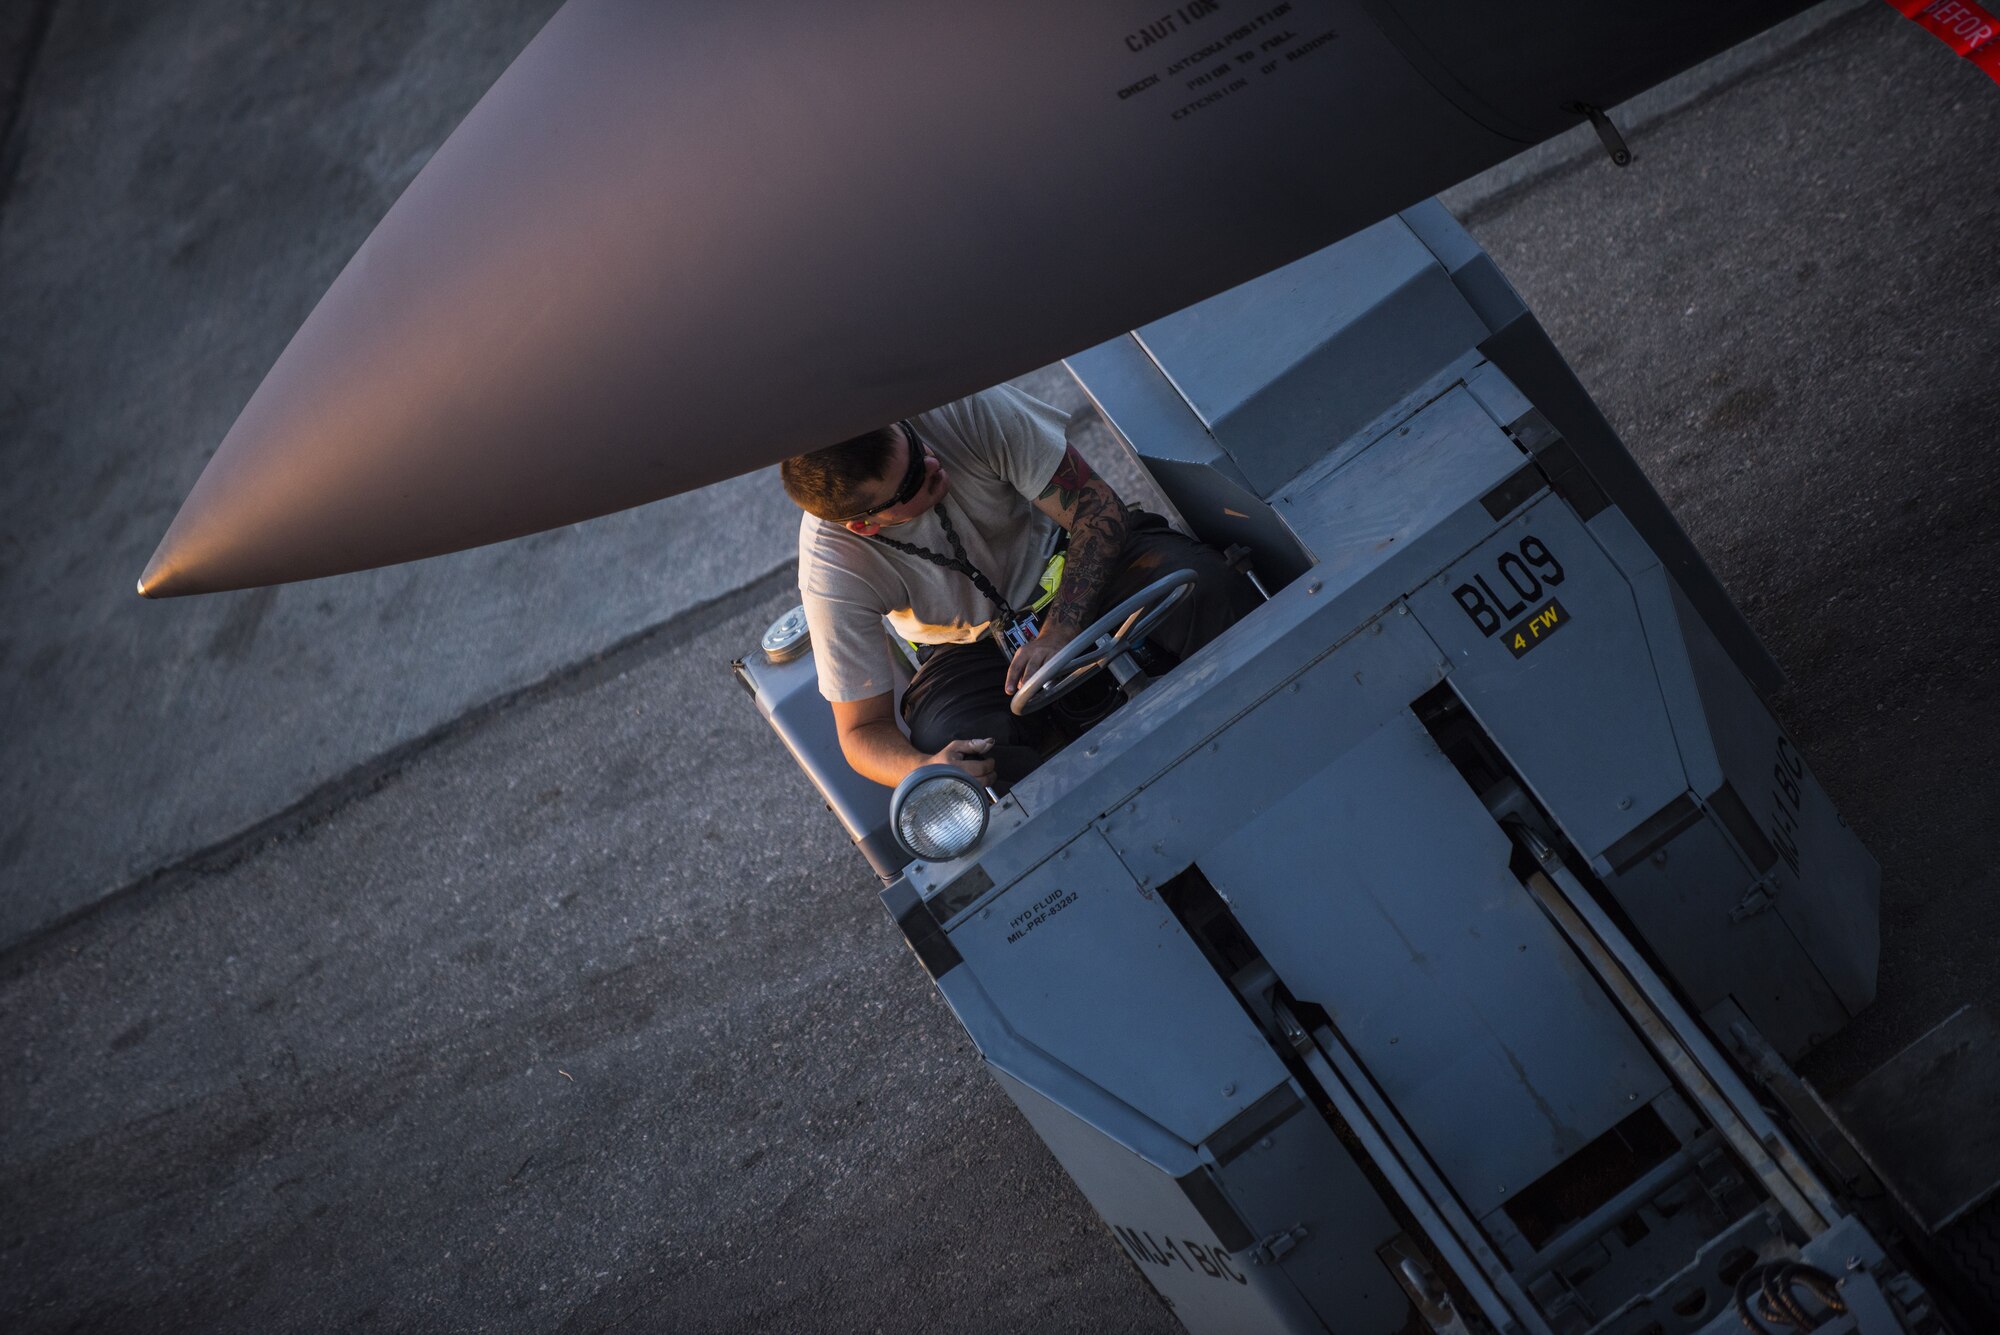 Senior Airman Andrew Rozycki, assigned to the 332d Expeditionary Maintenance Squadron, maneuvers a munitions loader beneath the nose of an F-15E Strike Eagle November 10, 2017 in Southwest Asia. During the year, the 332d Air Expeditionary Wing’s 1,056 aircraft weapons and maintenance personnel enabled a record setting air campaign against the Islamic State, which included more than 4,000 F-15E Strike Eagle combat sorties and more than 9,000 munitions expended. (U.S. Air Force photo by Staff Sgt. Joshua Kleinholz)